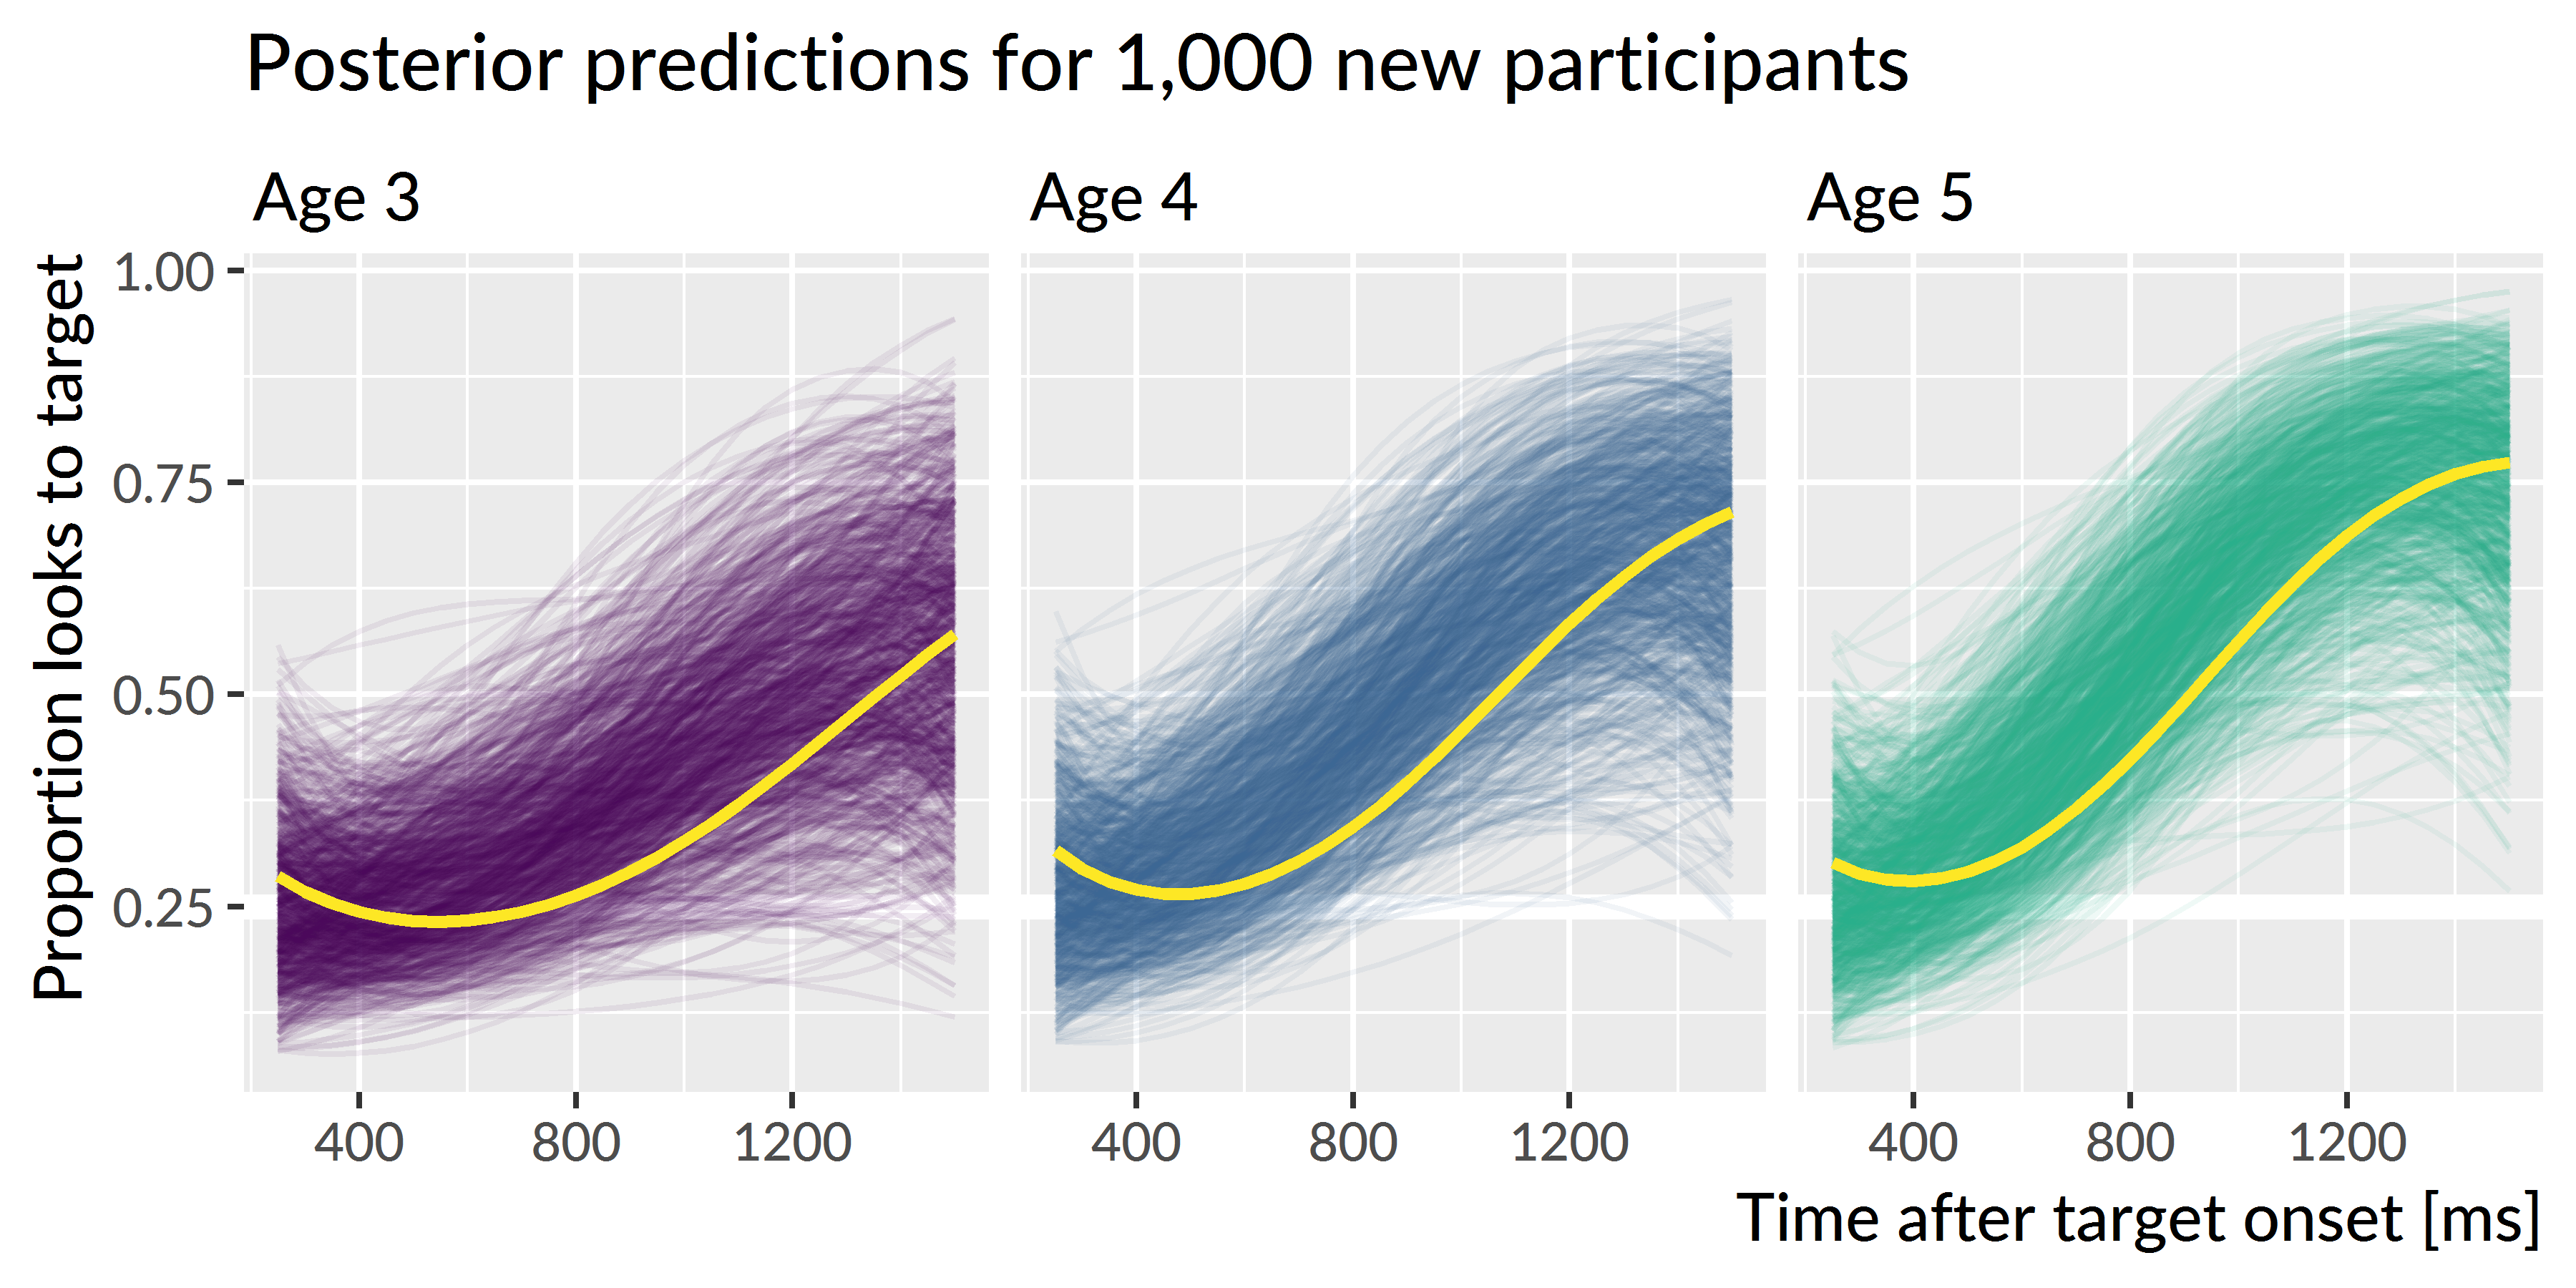 Posterior predictions for hypothetical unobserved participants. Each line represents the predicted performance for a new participant. The three light lines highlight predictions from one single simulated participant. The simulated participant shows both longitudinal improvement in word recognition and similar relative performance compared to other simulations each year, indicating that the model would predict new children to improve year over year and show stable individual differences over time.